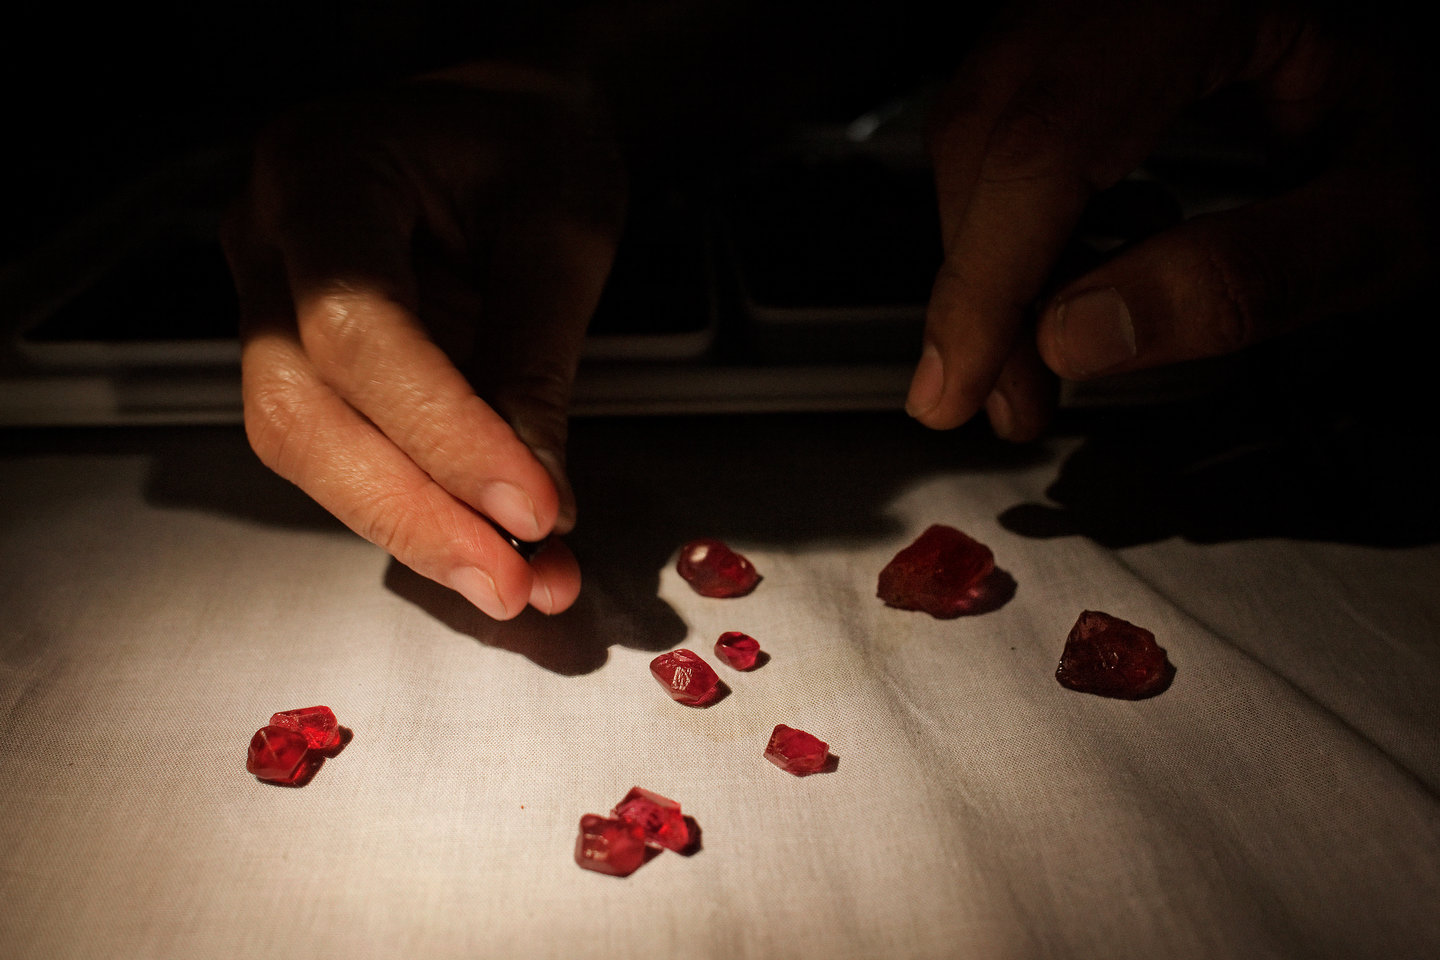 Two hands inspect red spinel gemstones on a cloth covered table.